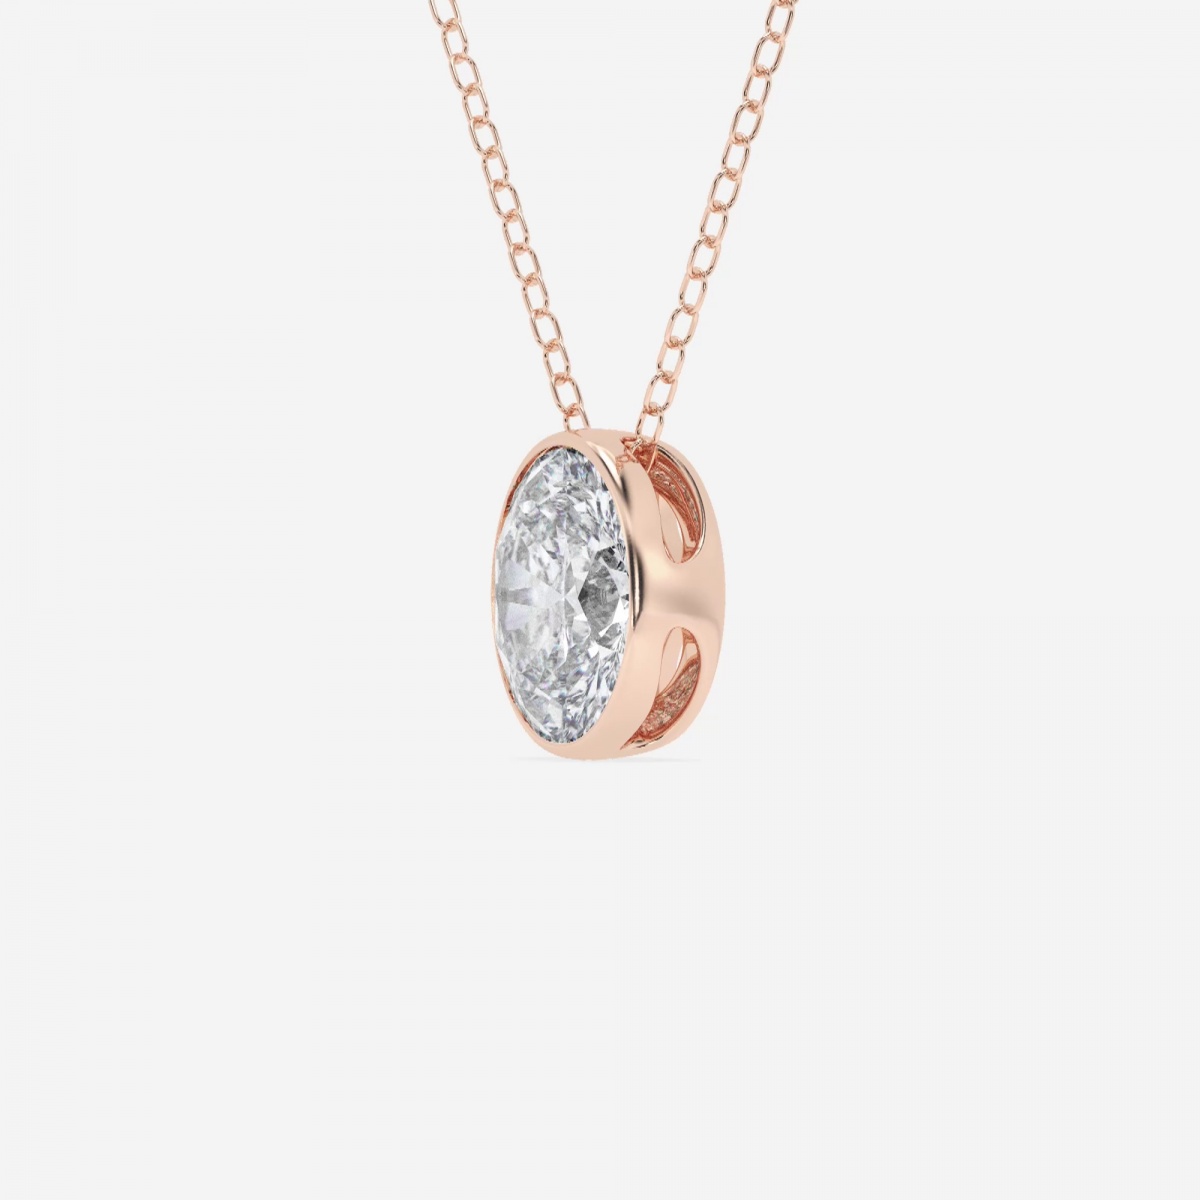 Additional Image 1 for  1 ctw Oval Lab Grown Diamond Bezel Set Solitaire Pendant with Adjustable Chain